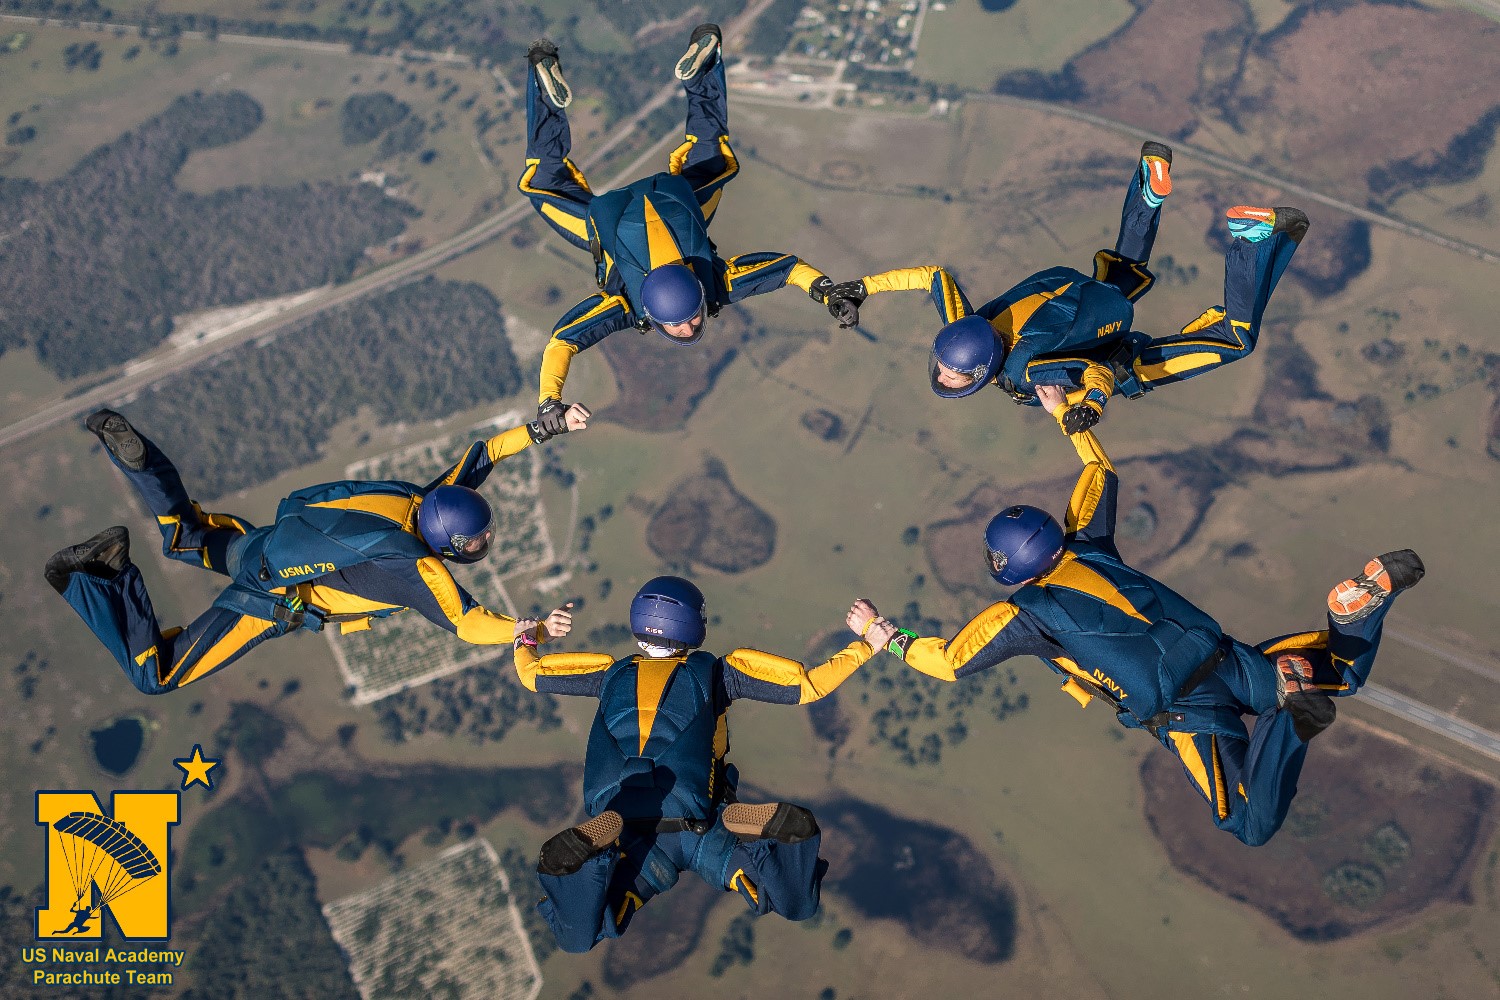 Support USNA Skydiving